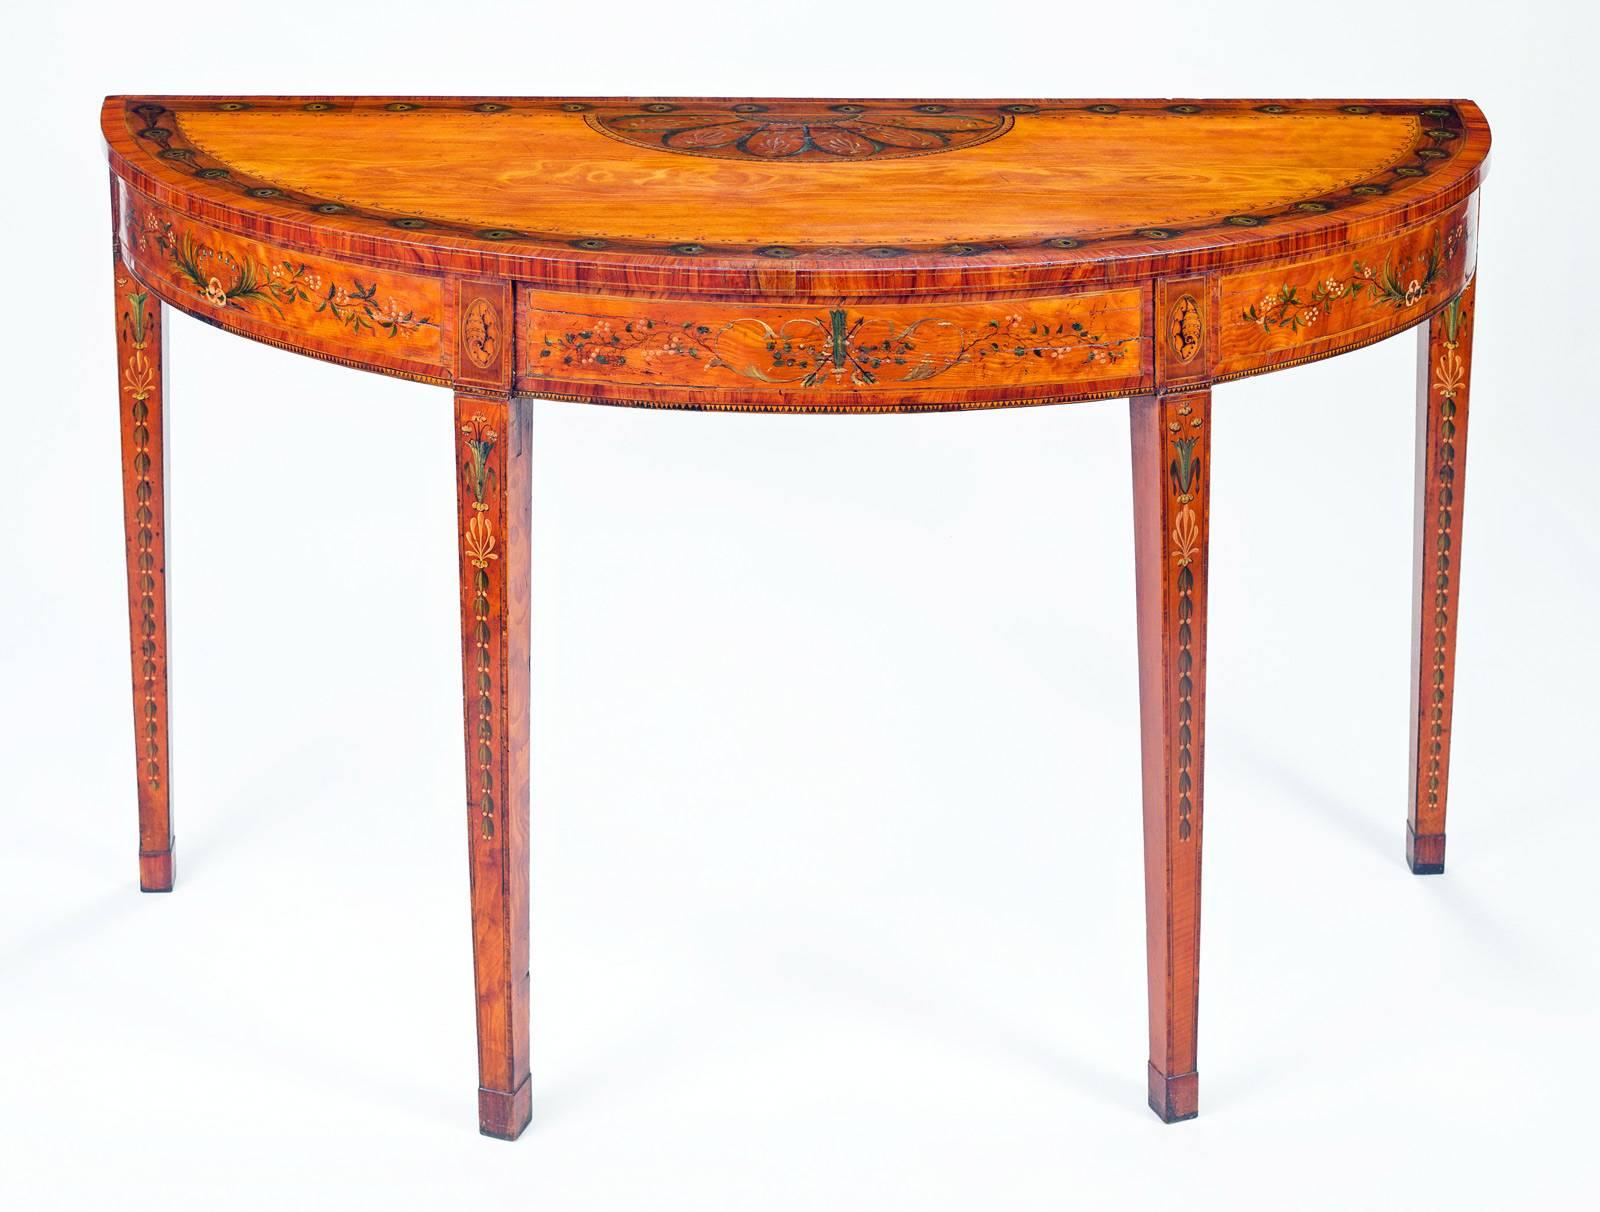 Superb Georgian, possibly period Adam, satinwood and painted demilune or D-shaped console table, inlaid with rosewood, decorated around the top edge with painted peacock feathers, centered by a half-round floral pattern, the frieze centered by a